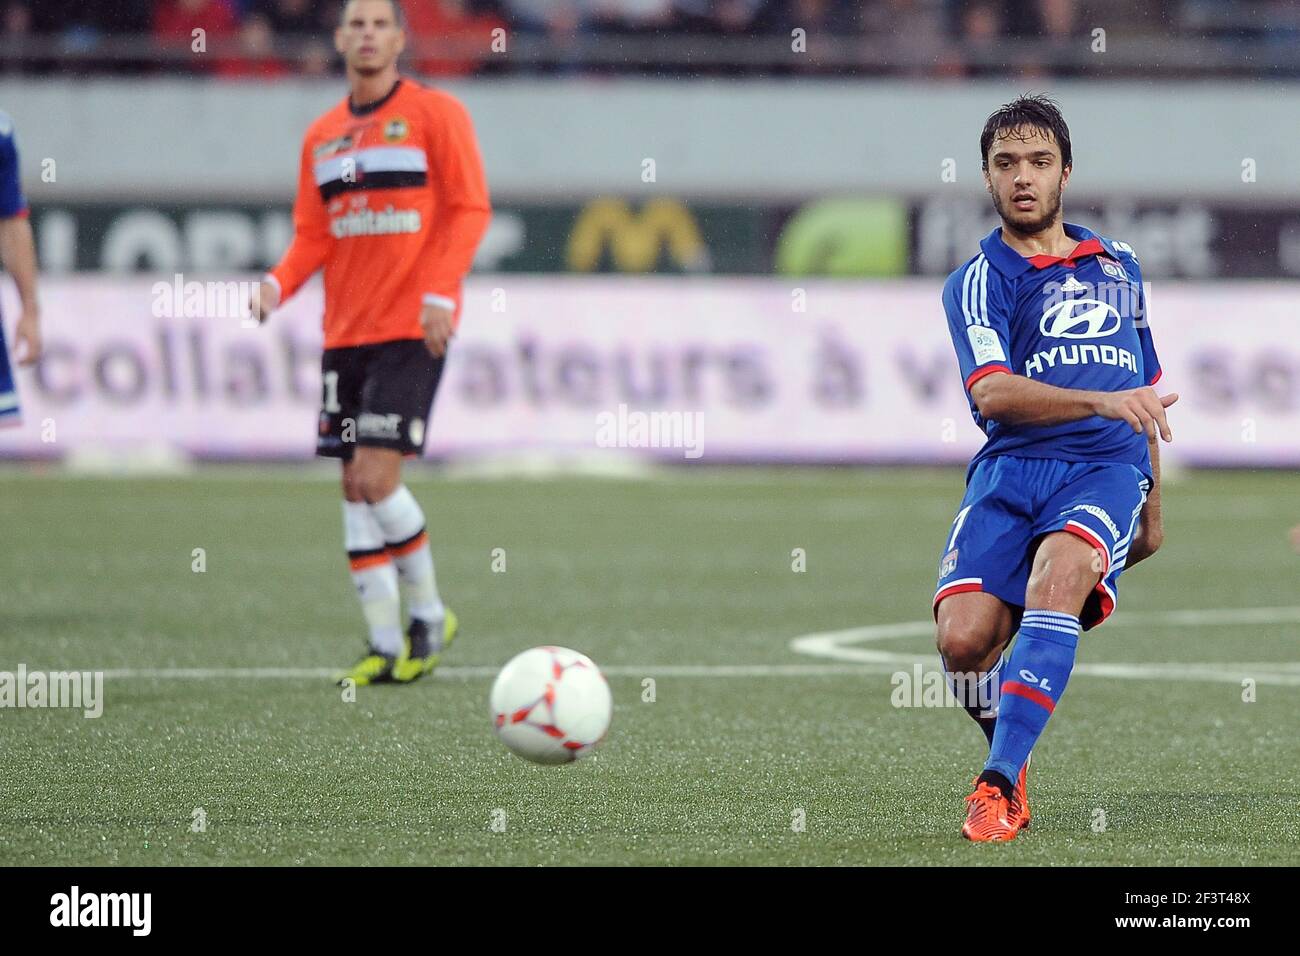 FOOTBALL - FRENCH CHAMPIONSHIP 2012/2013 - L1 - FC LORIENT v OLYMPIQUE LYONNAIS - 7/10/2012 - PHOTO PASCAL ALLEE / DPPI - Clement GRENIER (OL) Stock Photo